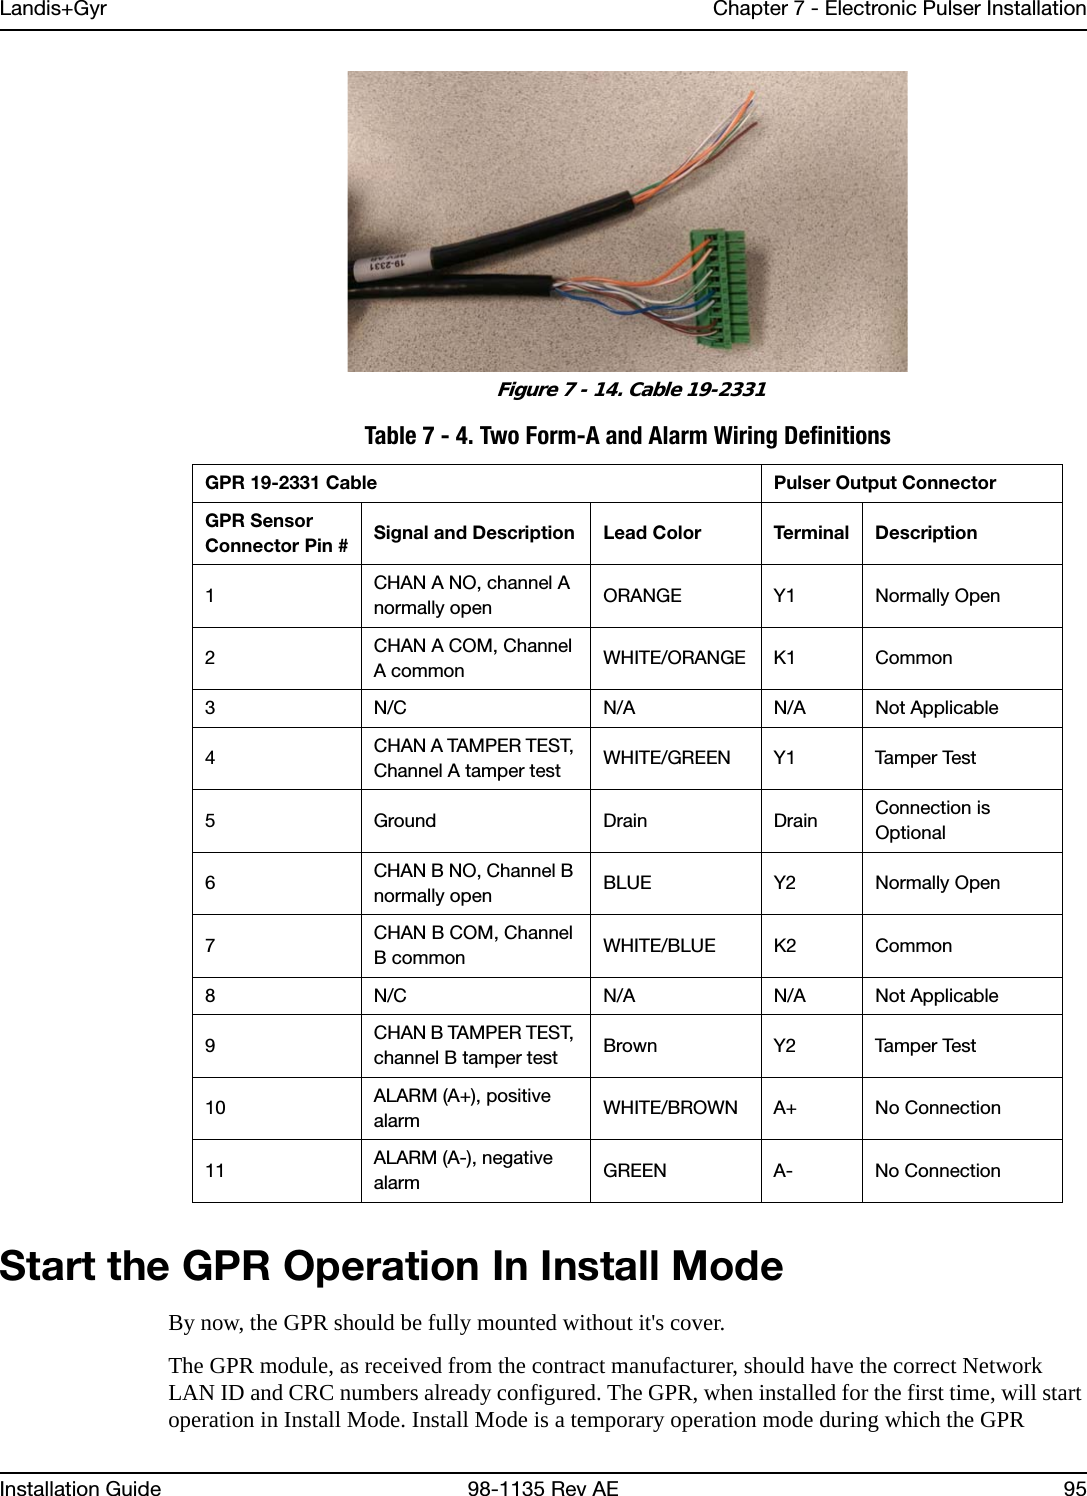 Landis+Gyr Chapter 7 - Electronic Pulser InstallationInstallation Guide 98-1135 Rev AE 95 Figure 7 - 14. Cable 19-2331Start the GPR Operation In Install ModeBy now, the GPR should be fully mounted without it&apos;s cover.The GPR module, as received from the contract manufacturer, should have the correct Network LAN ID and CRC numbers already configured. The GPR, when installed for the first time, will start operation in Install Mode. Install Mode is a temporary operation mode during which the GPR Table 7 - 4. Two Form-A and Alarm Wiring DefinitionsGPR 19-2331 Cable Pulser Output ConnectorGPR Sensor Connector Pin # Signal and Description Lead Color Terminal Description1CHAN A NO, channel A normally open ORANGE Y1 Normally Open2CHAN A COM, Channel A common WHITE/ORANGE K1 Common3 N/C N/A N/A Not Applicable4CHAN A TAMPER TEST, Channel A tamper test WHITE/GREEN Y1 Tamper Test5 Ground Drain Drain Connection is Optional6CHAN B NO, Channel B normally open BLUE Y2 Normally Open7CHAN B COM, Channel B common WHITE/BLUE K2 Common8 N/C N/A N/A Not Applicable9CHAN B TAMPER TEST, channel B tamper test Brown Y2 Tamper Test10 ALARM (A+), positive alarm WHITE/BROWN A+ No Connection11 ALARM (A-), negative alarm GREEN A- No Connection